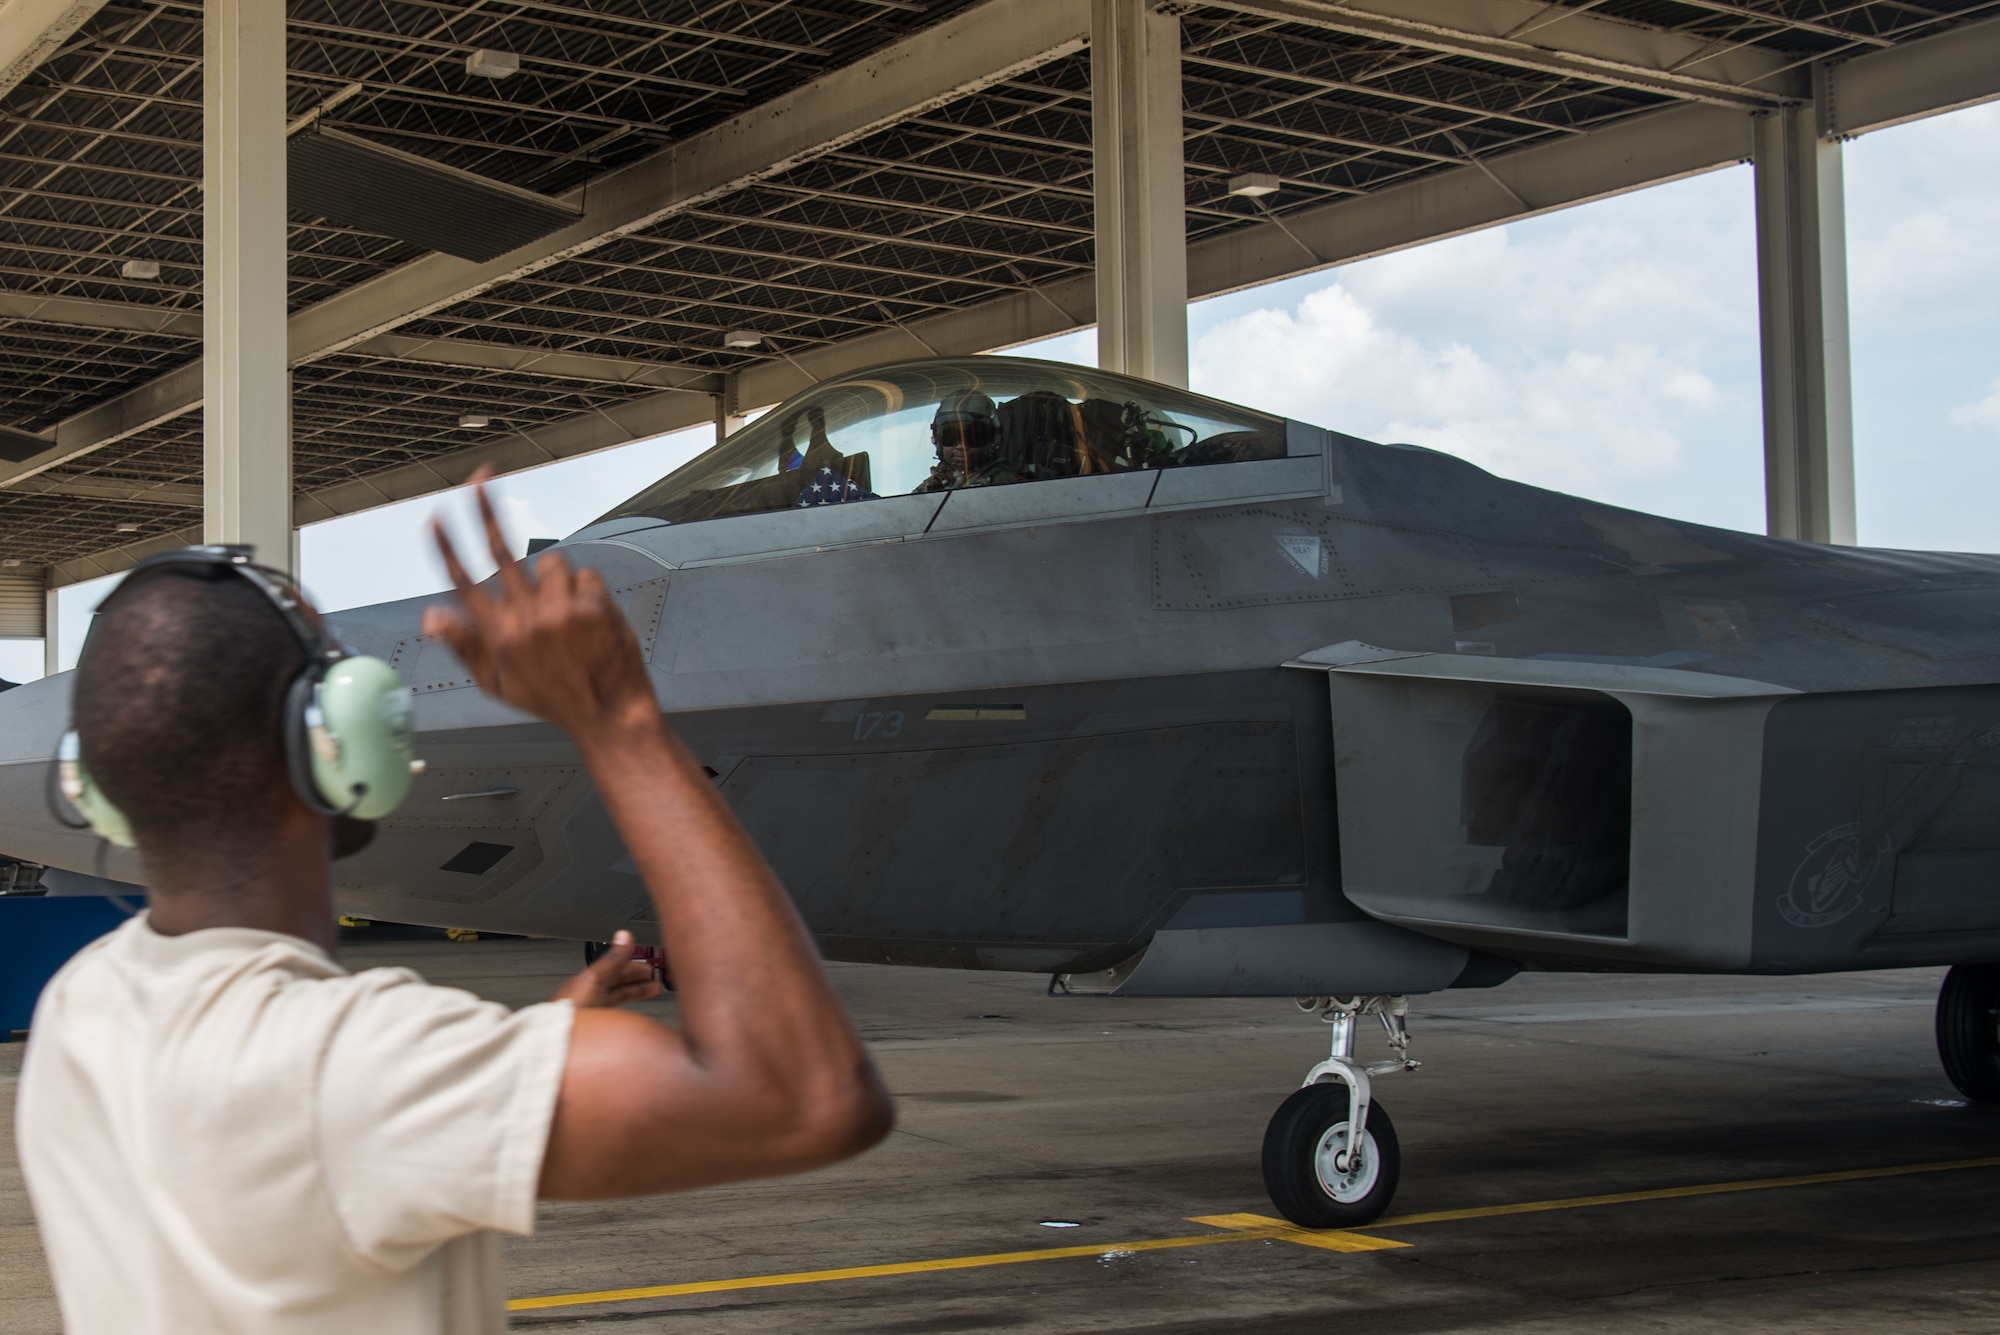 An F-22 Maintainer marshals U.S. Air Force Maj. Paul “Loco” Lopez, F-22 Raptor Demonstration Team pilot, before takeoff at Joint Base Langley-Eustis, Virginia, June 6, 2019.